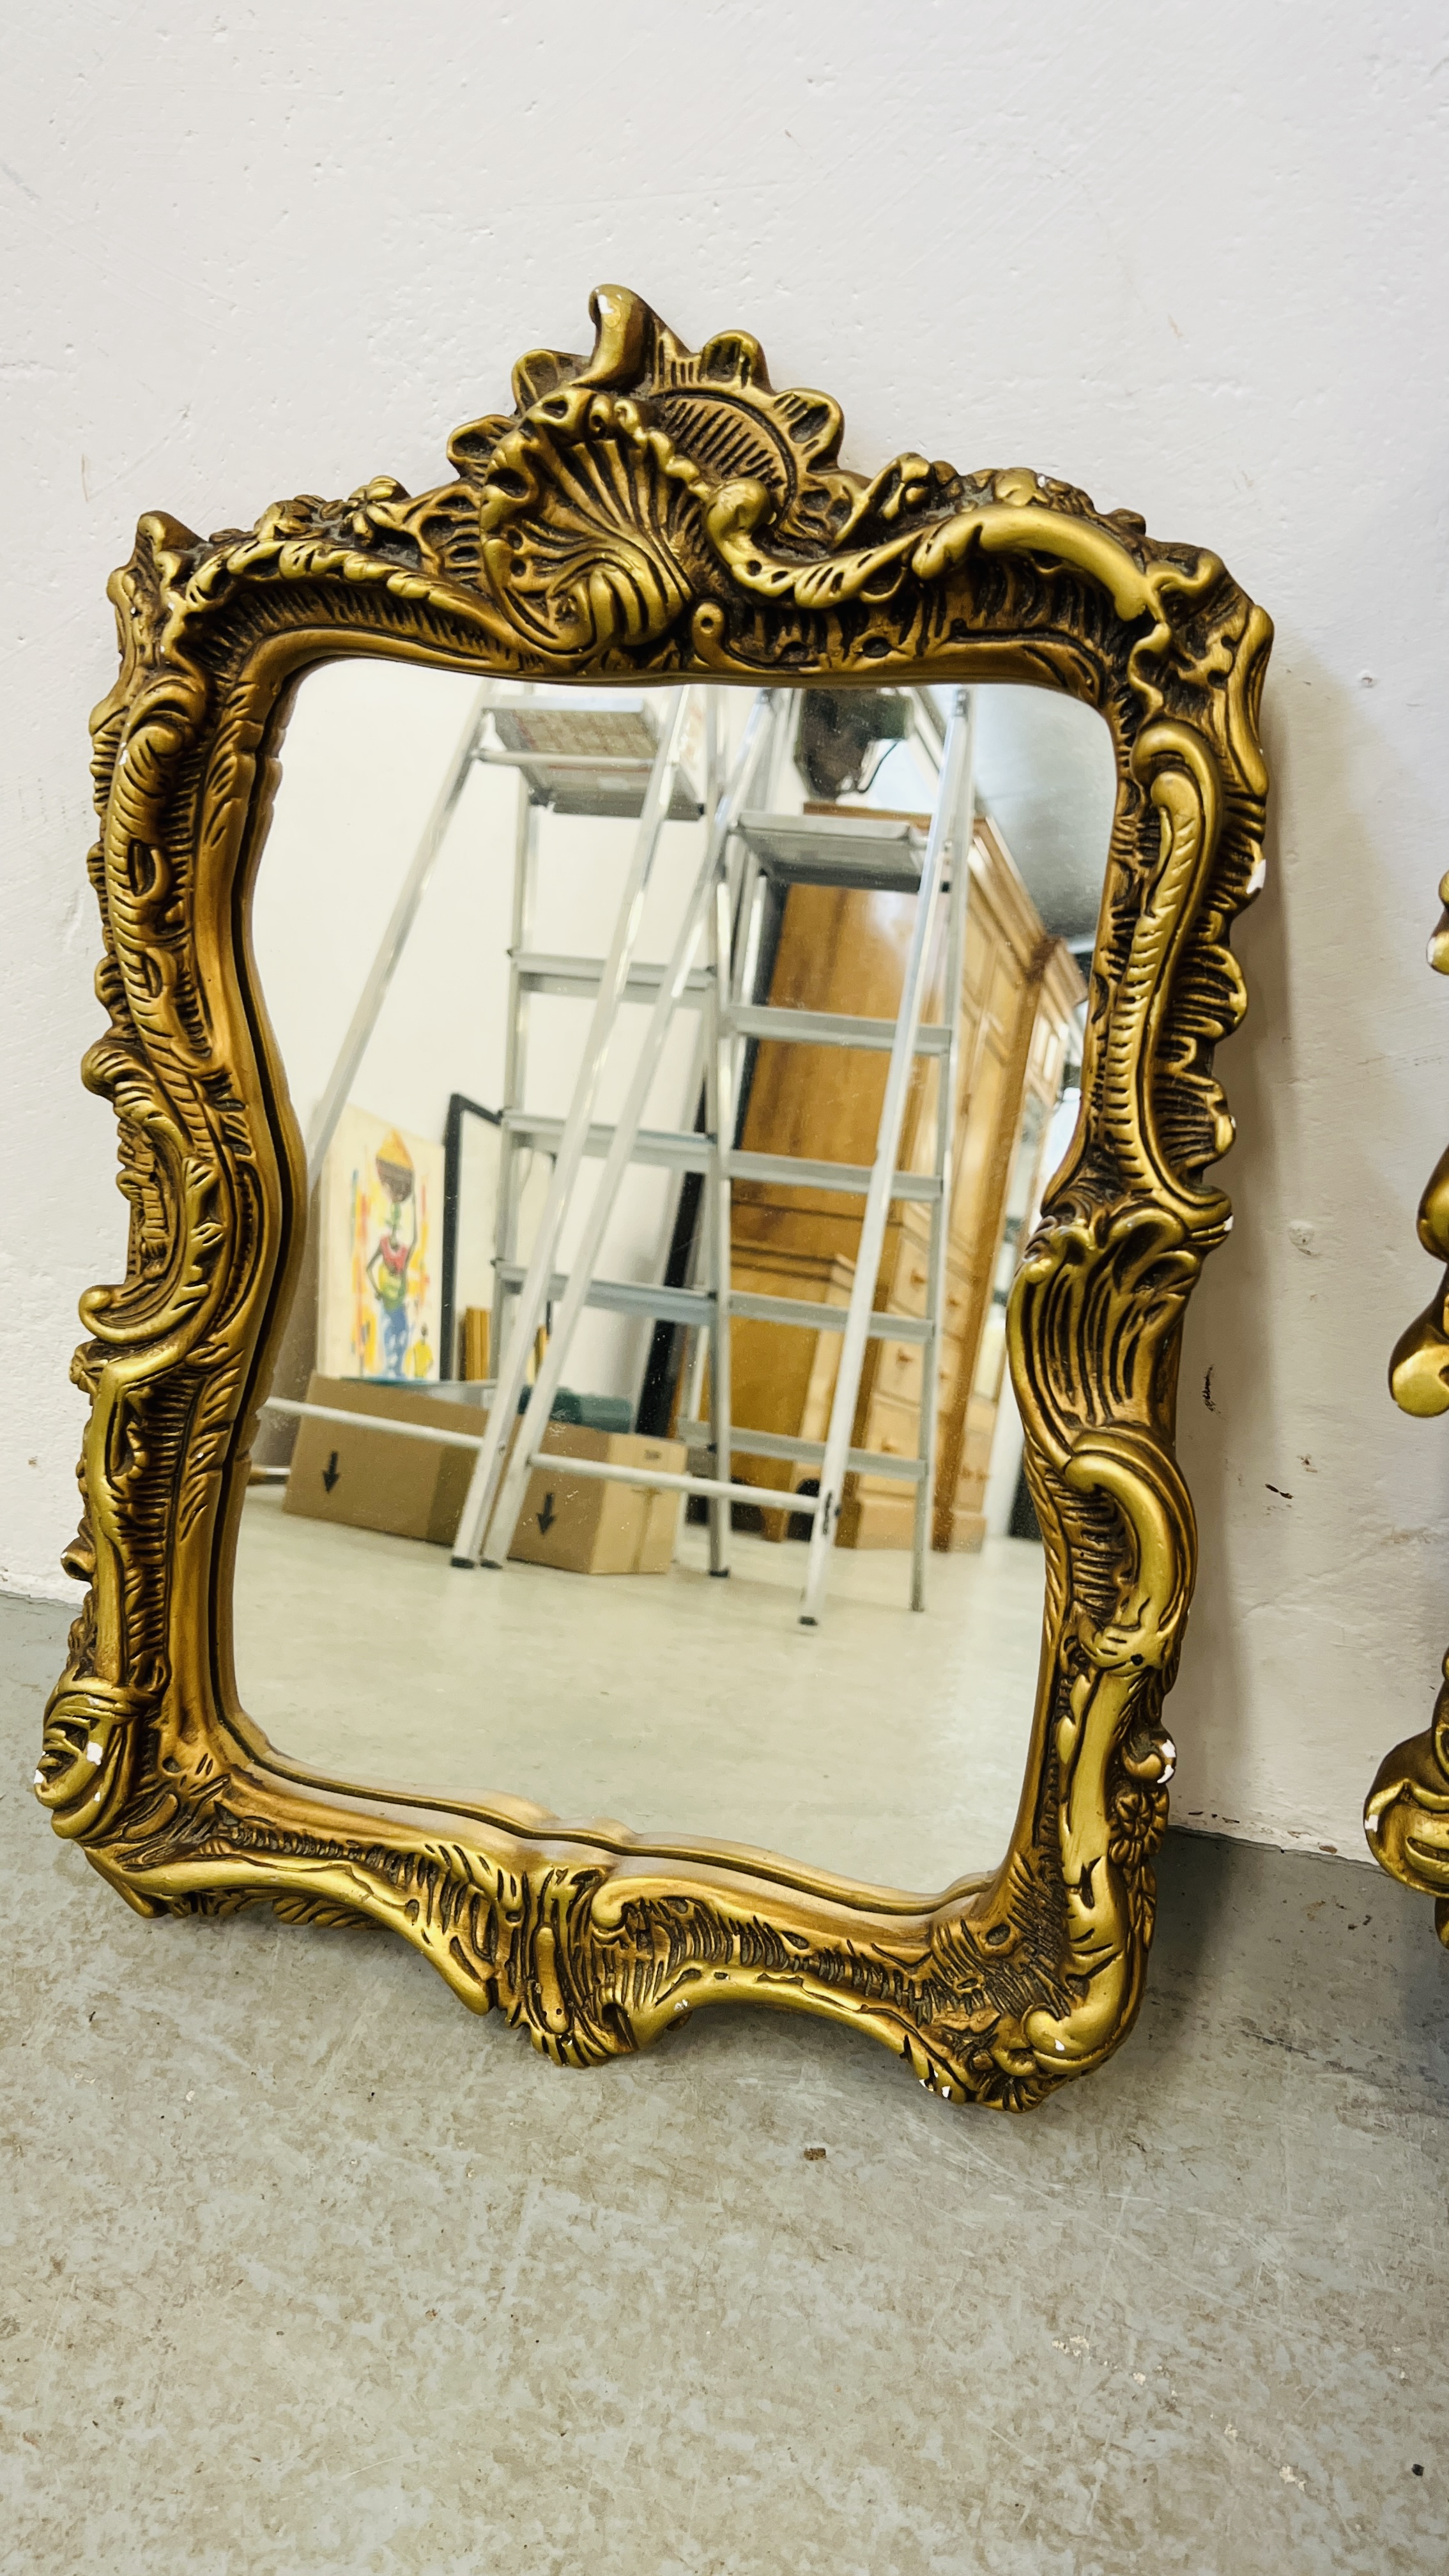 FOUR ORNATE GILT FRAMED DECORATIVE WALL MIRRORS OF VARIOUS DESIGNS - Image 4 of 6